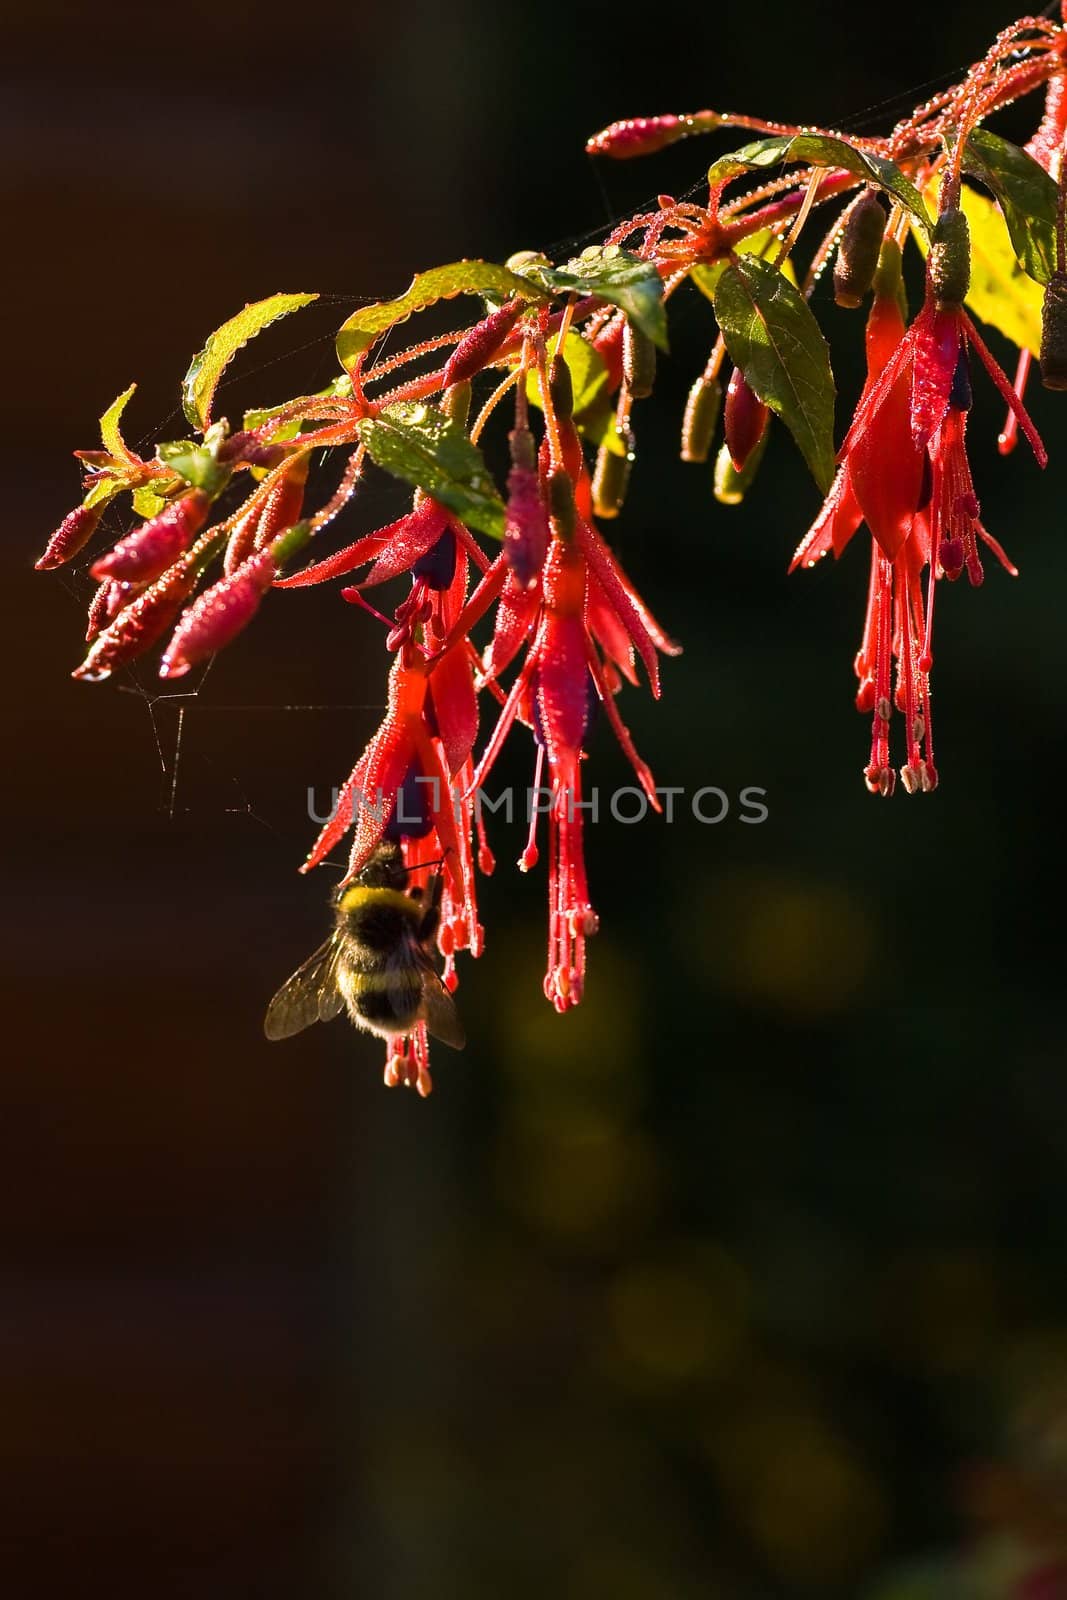 Bumble bee flying on Fuchsia flowers to get nectar on early autumn morning